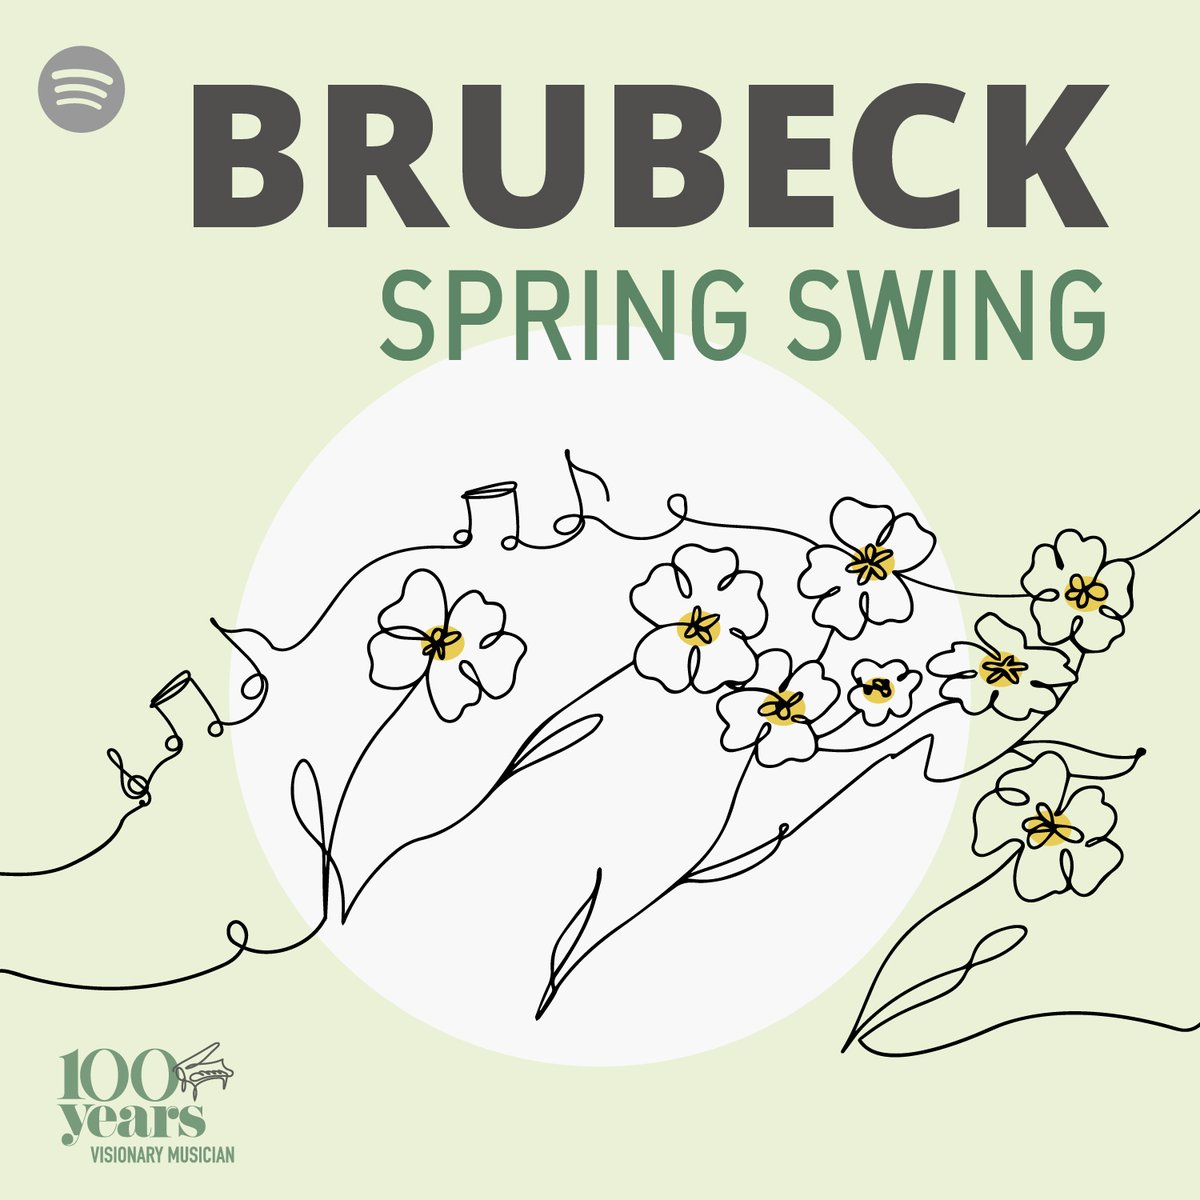 Spring has swung! 🌷🌱Dance along with Dave on this brand new “Brubeck Spring Swing” @Spotify playlist. 🎧Turn on your speakers and click the 🎶 link below 🎶 to get into the spring groove. 😎 open.spotify.com/playlist/6IhJF…